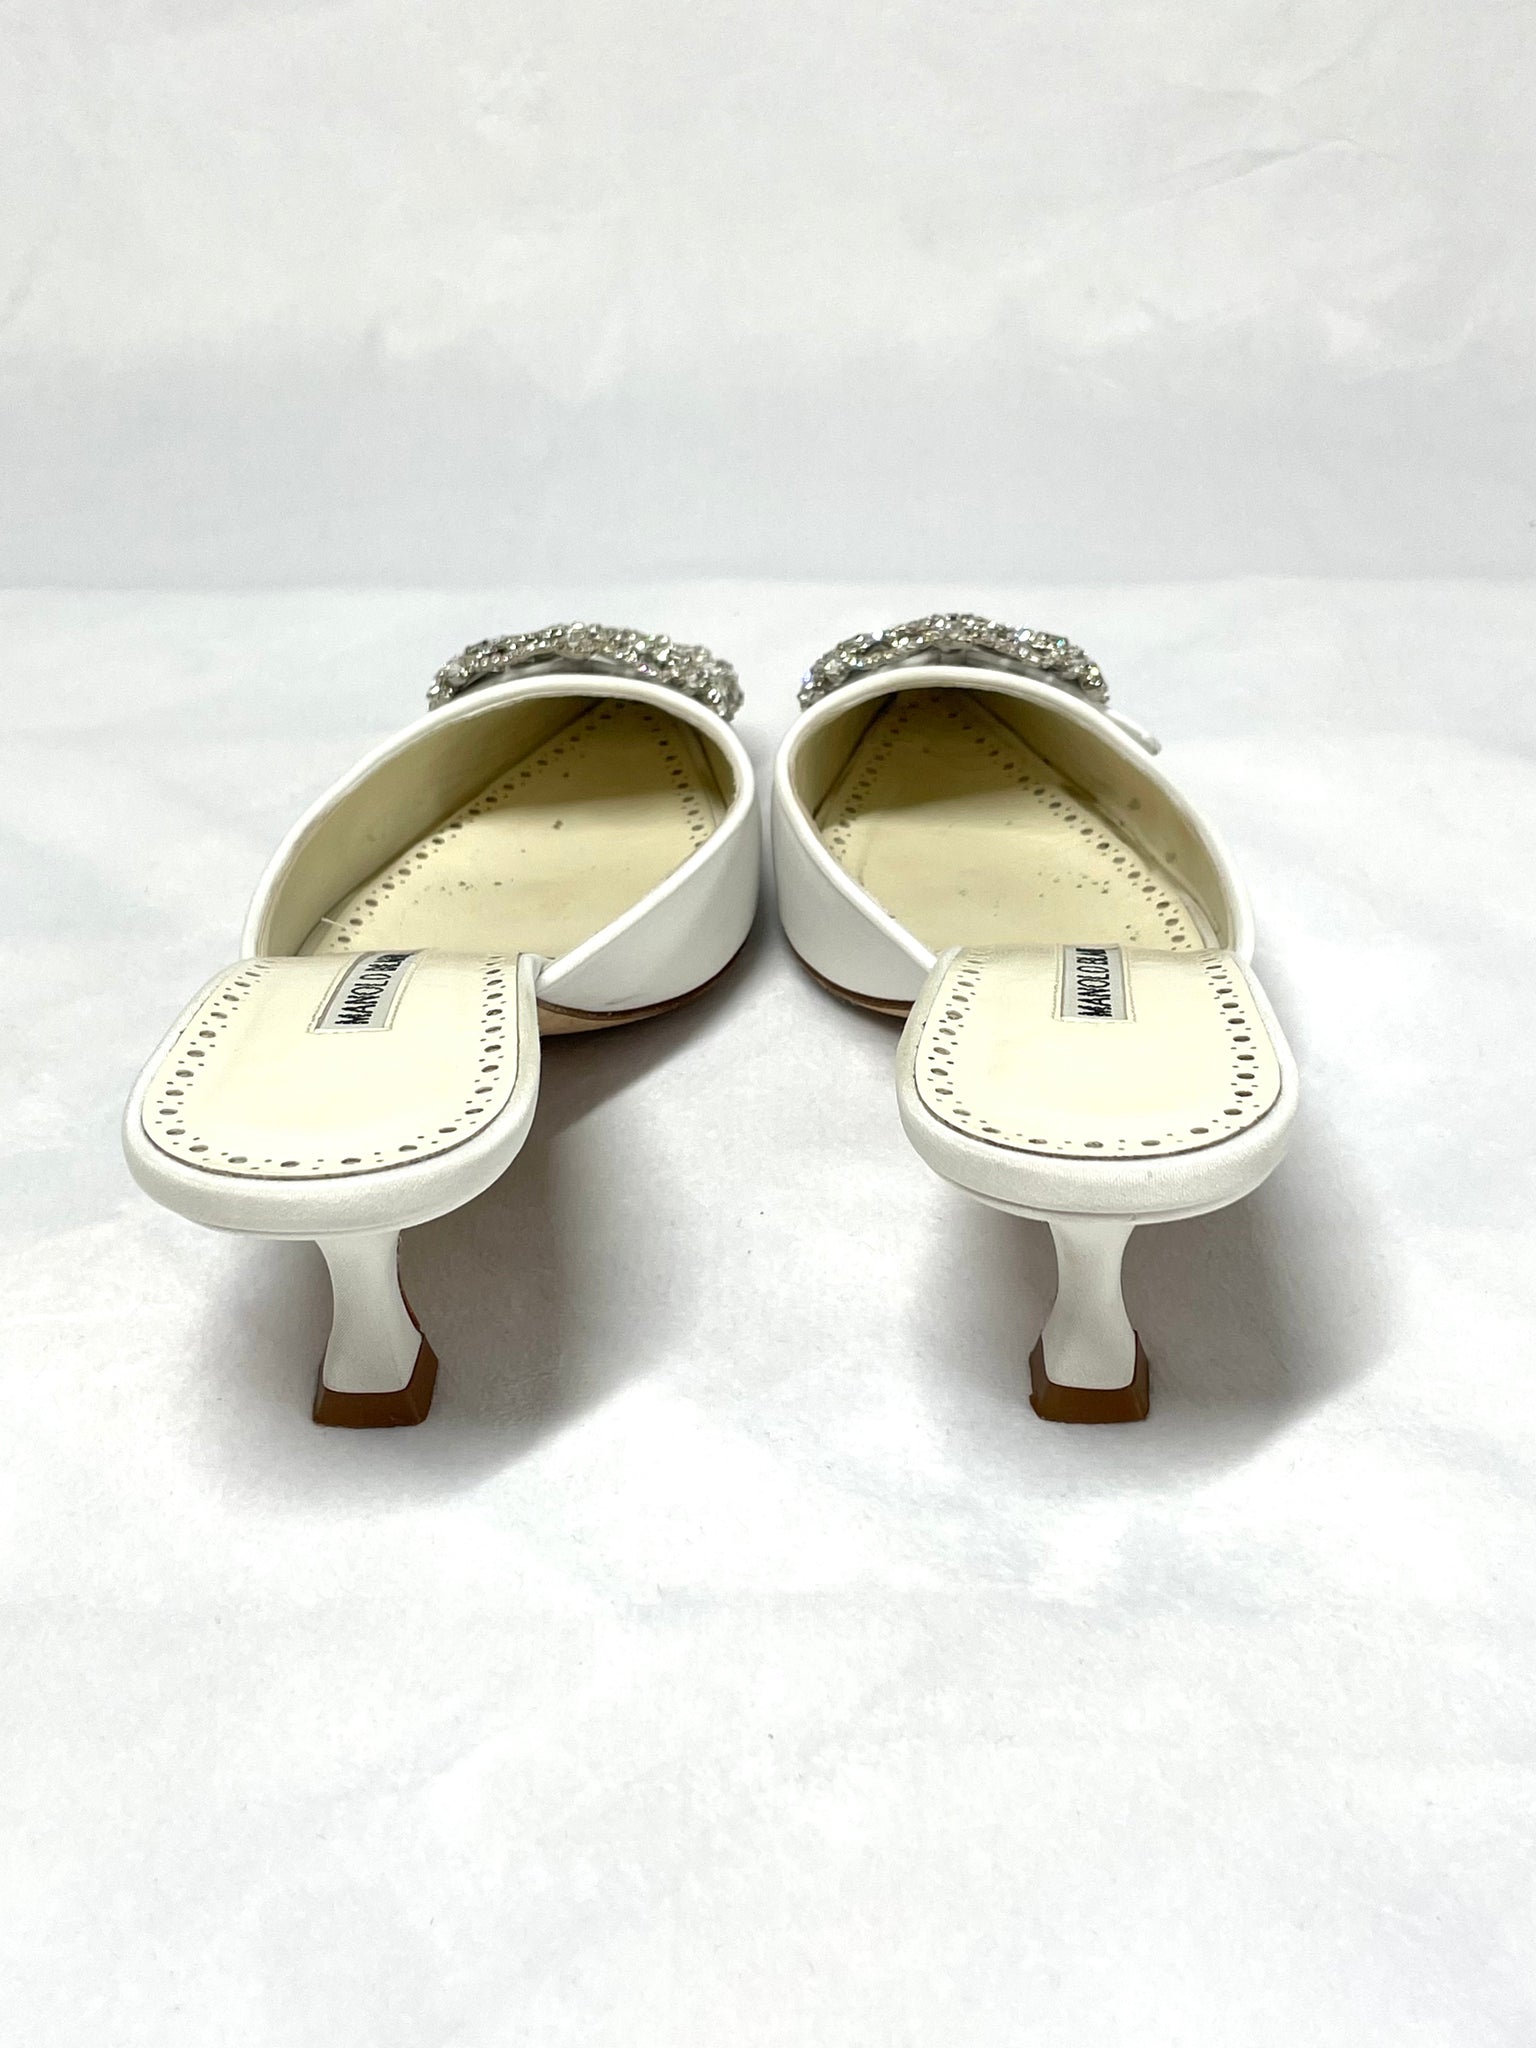 Pre Loved Manolo Blahnik Maysale Bride 37 in White Silk and Silver Embellishments Kitten Heel Mules available at UniKoncept in Waterloo